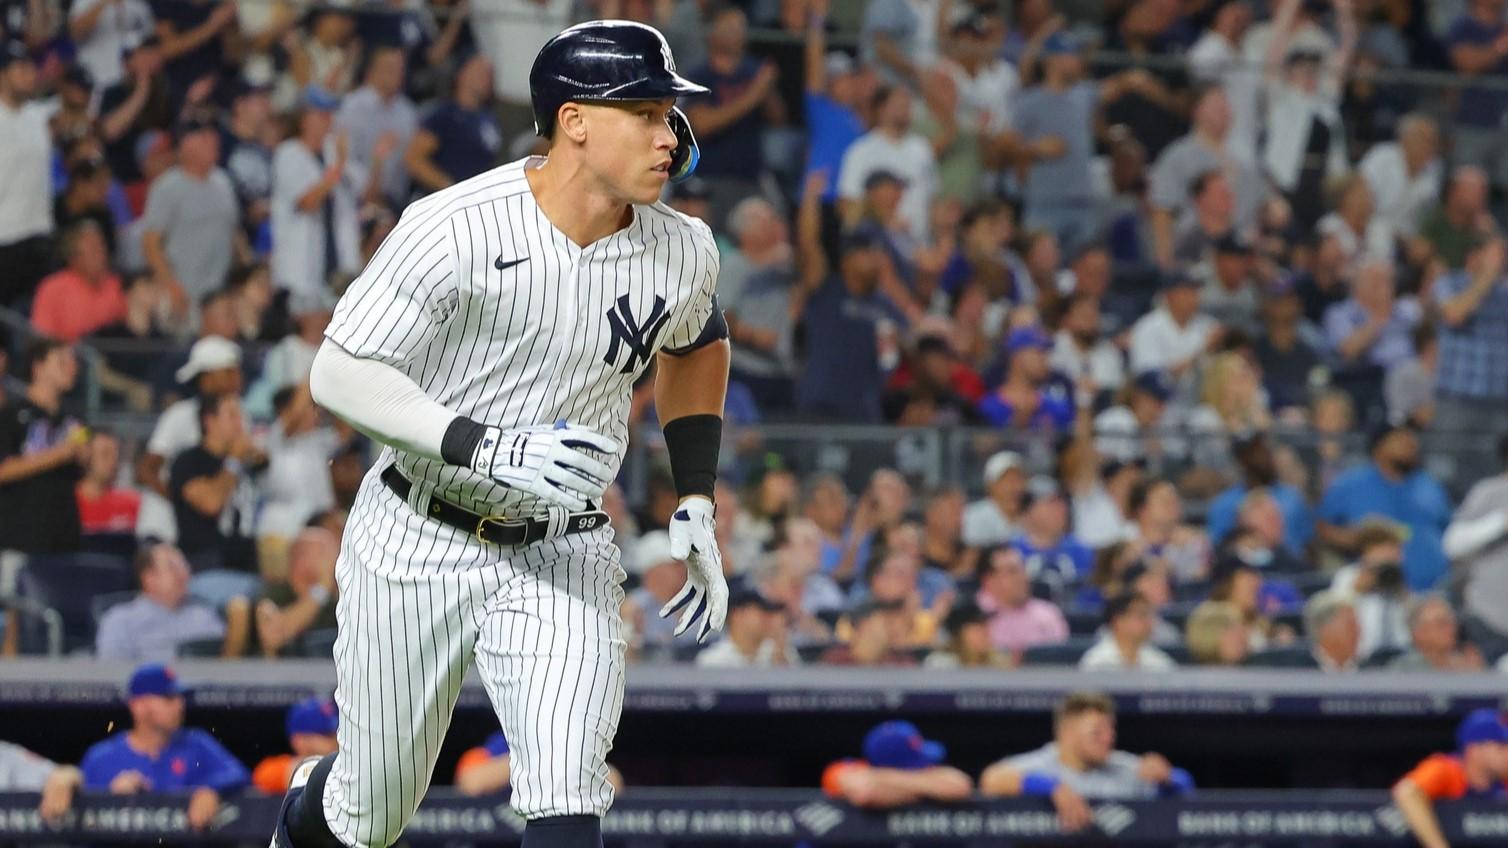 Aug 23, 2022; Bronx, New York, USA; New York Yankees right fielder Aaron Judge (99) watches his RBI single during the seventh inning against the New York Mets at Yankee Stadium.